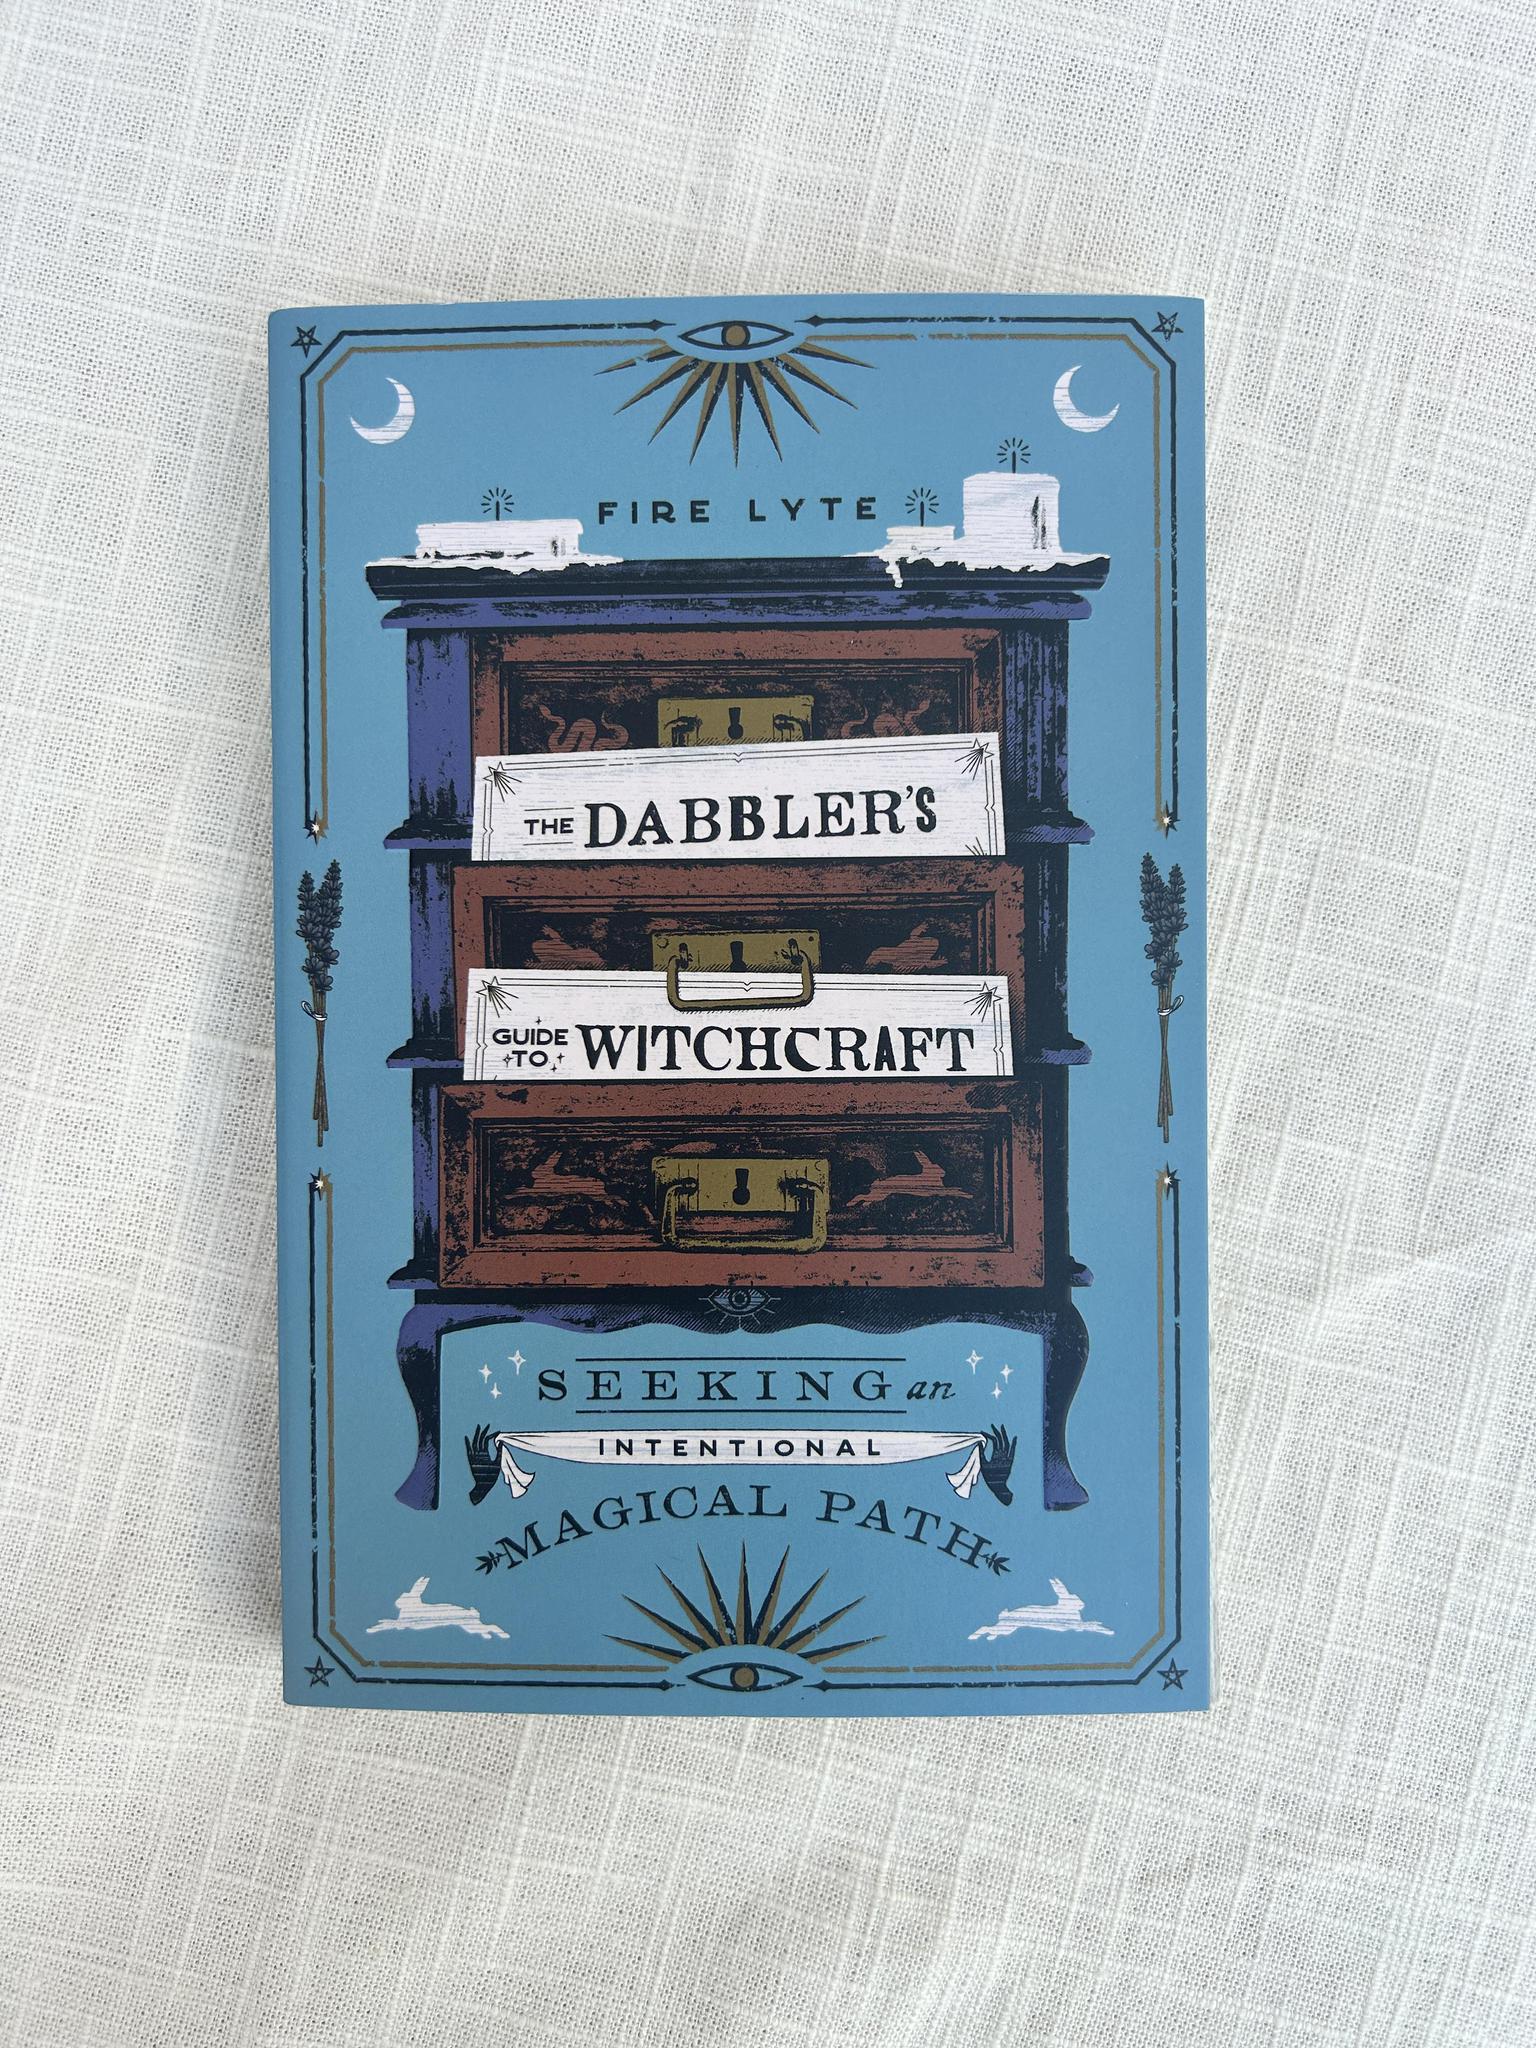 The Dabblers Guide To Witchcraft book